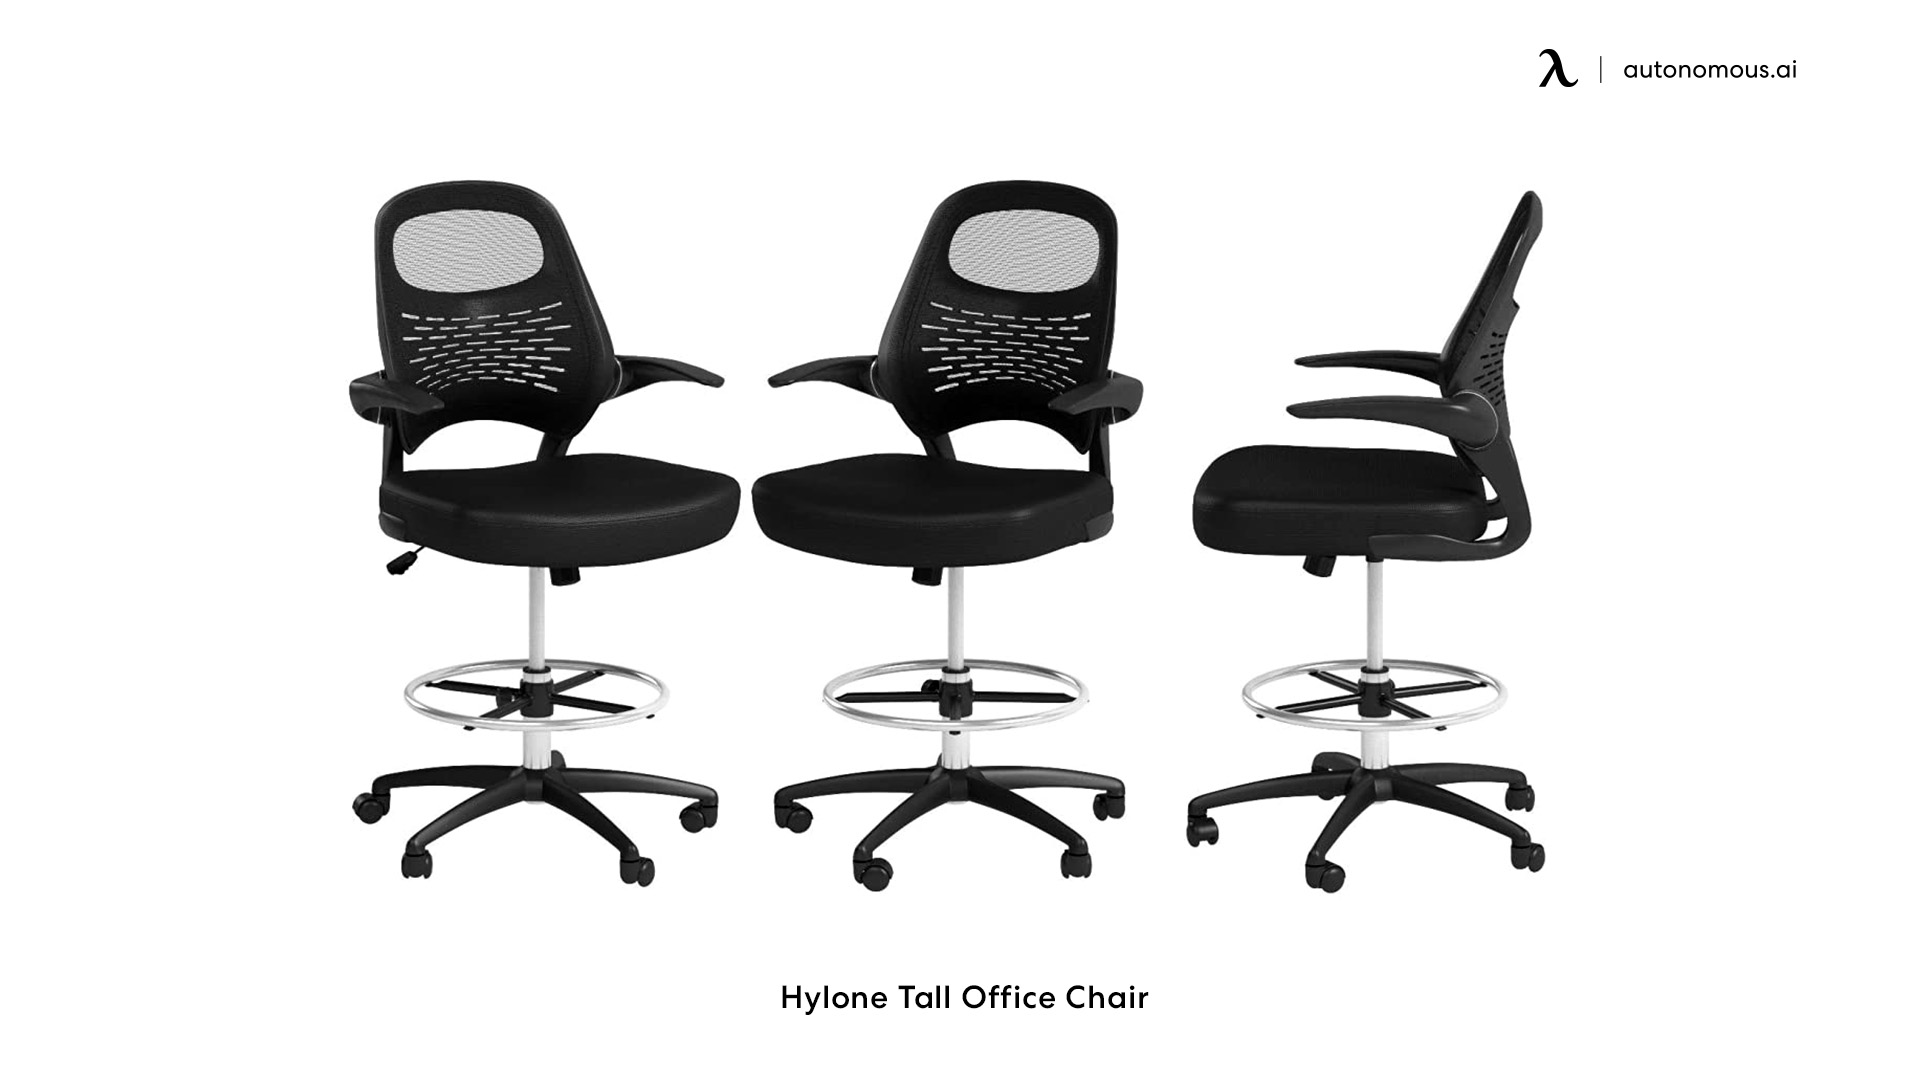 Hylone tall office chair for standing desk